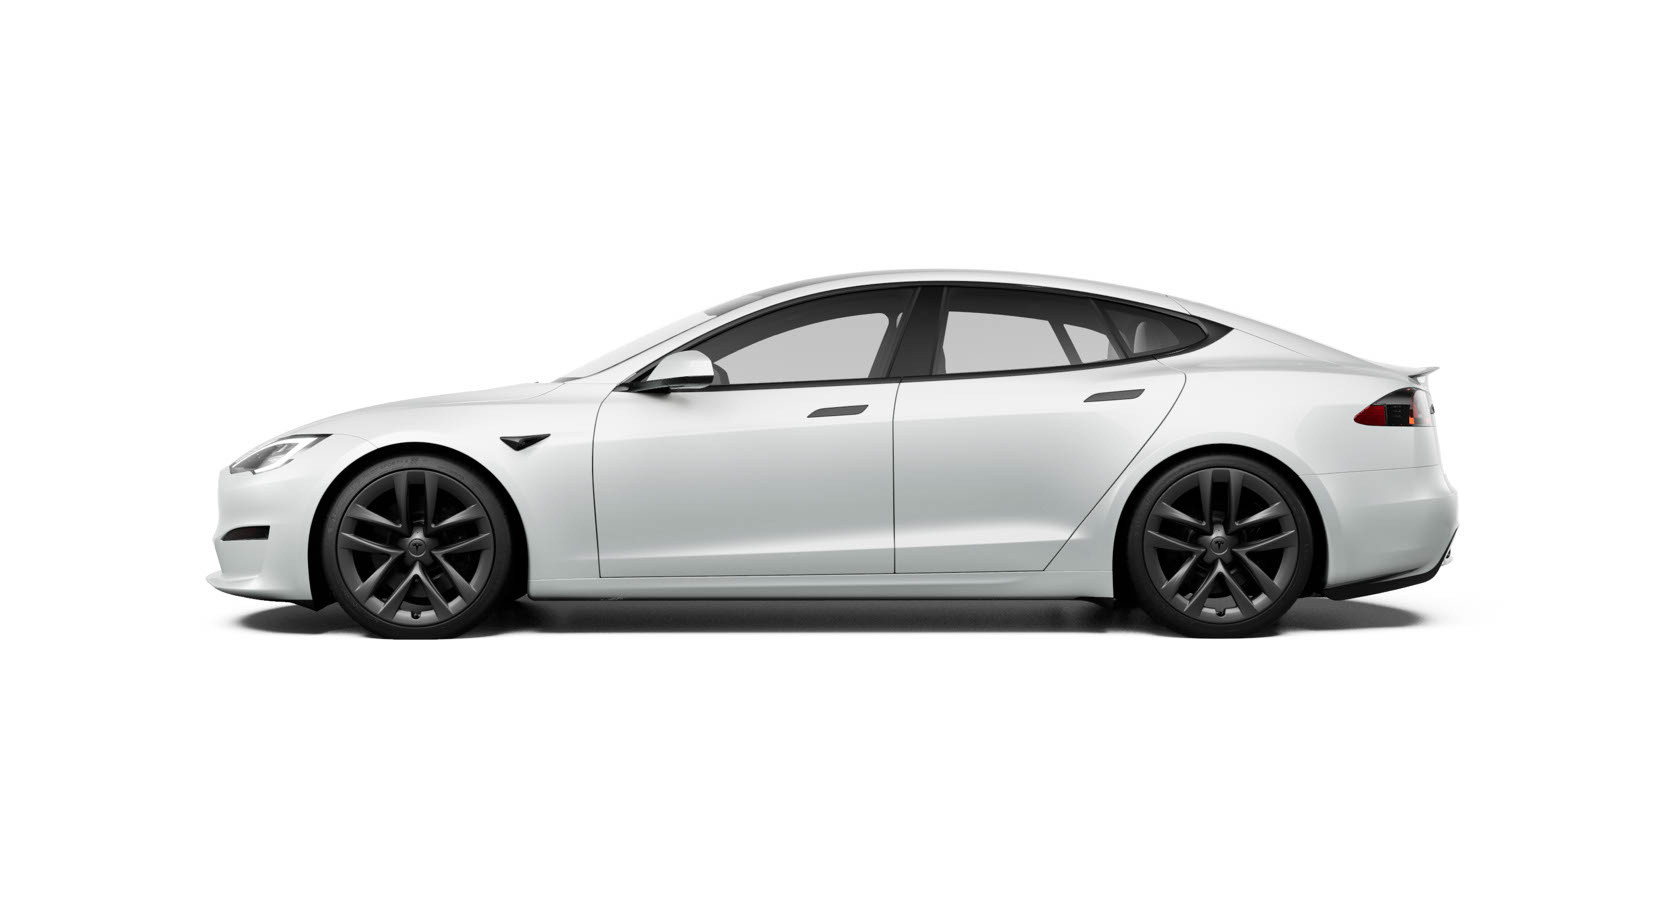 https://e-vehicleinfo.com/tesla-model-s-price-in-india-specifications-highlights/